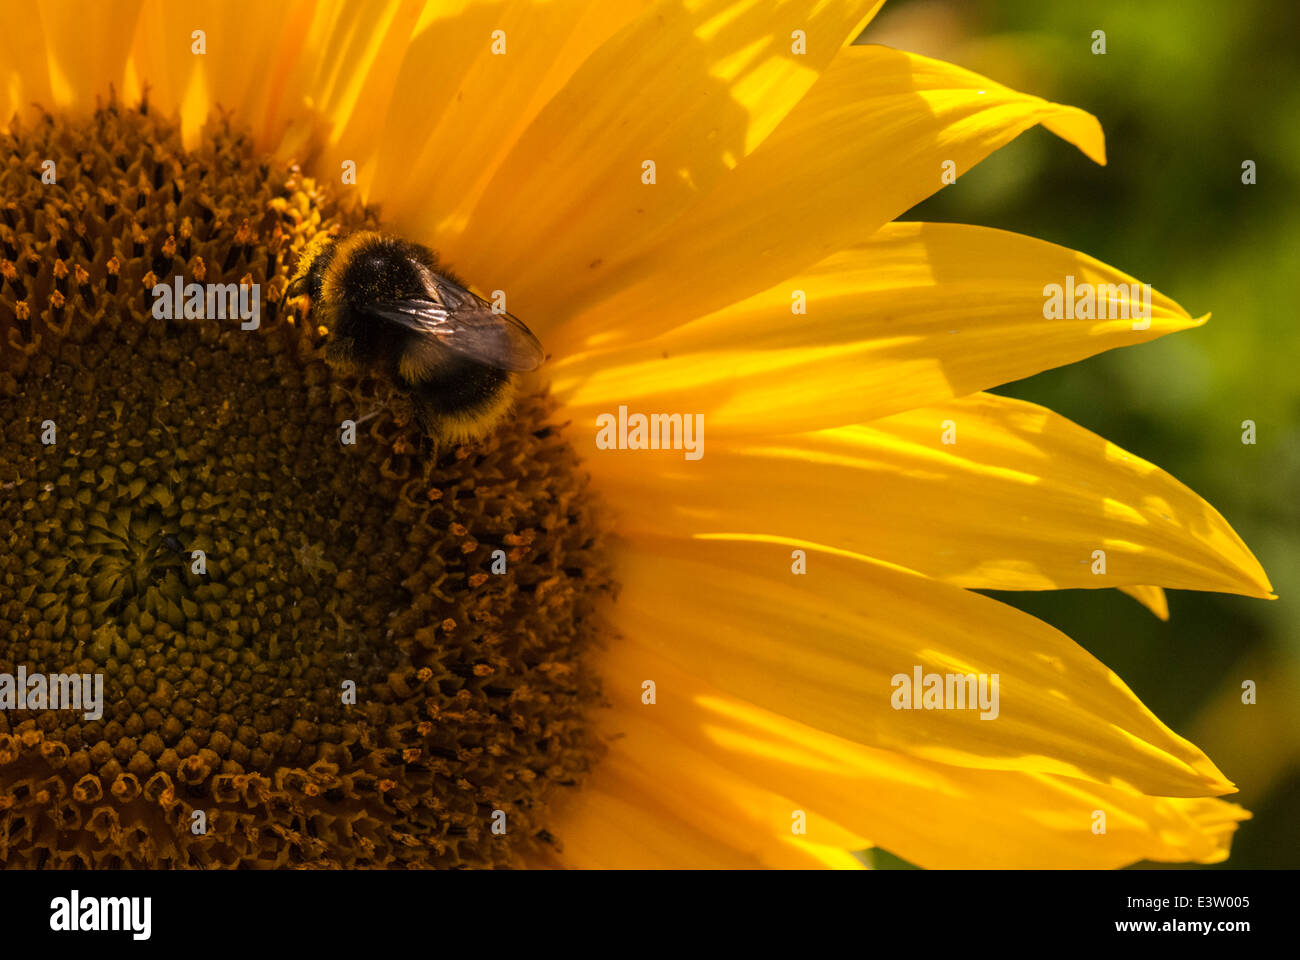 A Bumble bee, Bombus, on a Sunflower Head, Helianthus annuus. Stock Photo